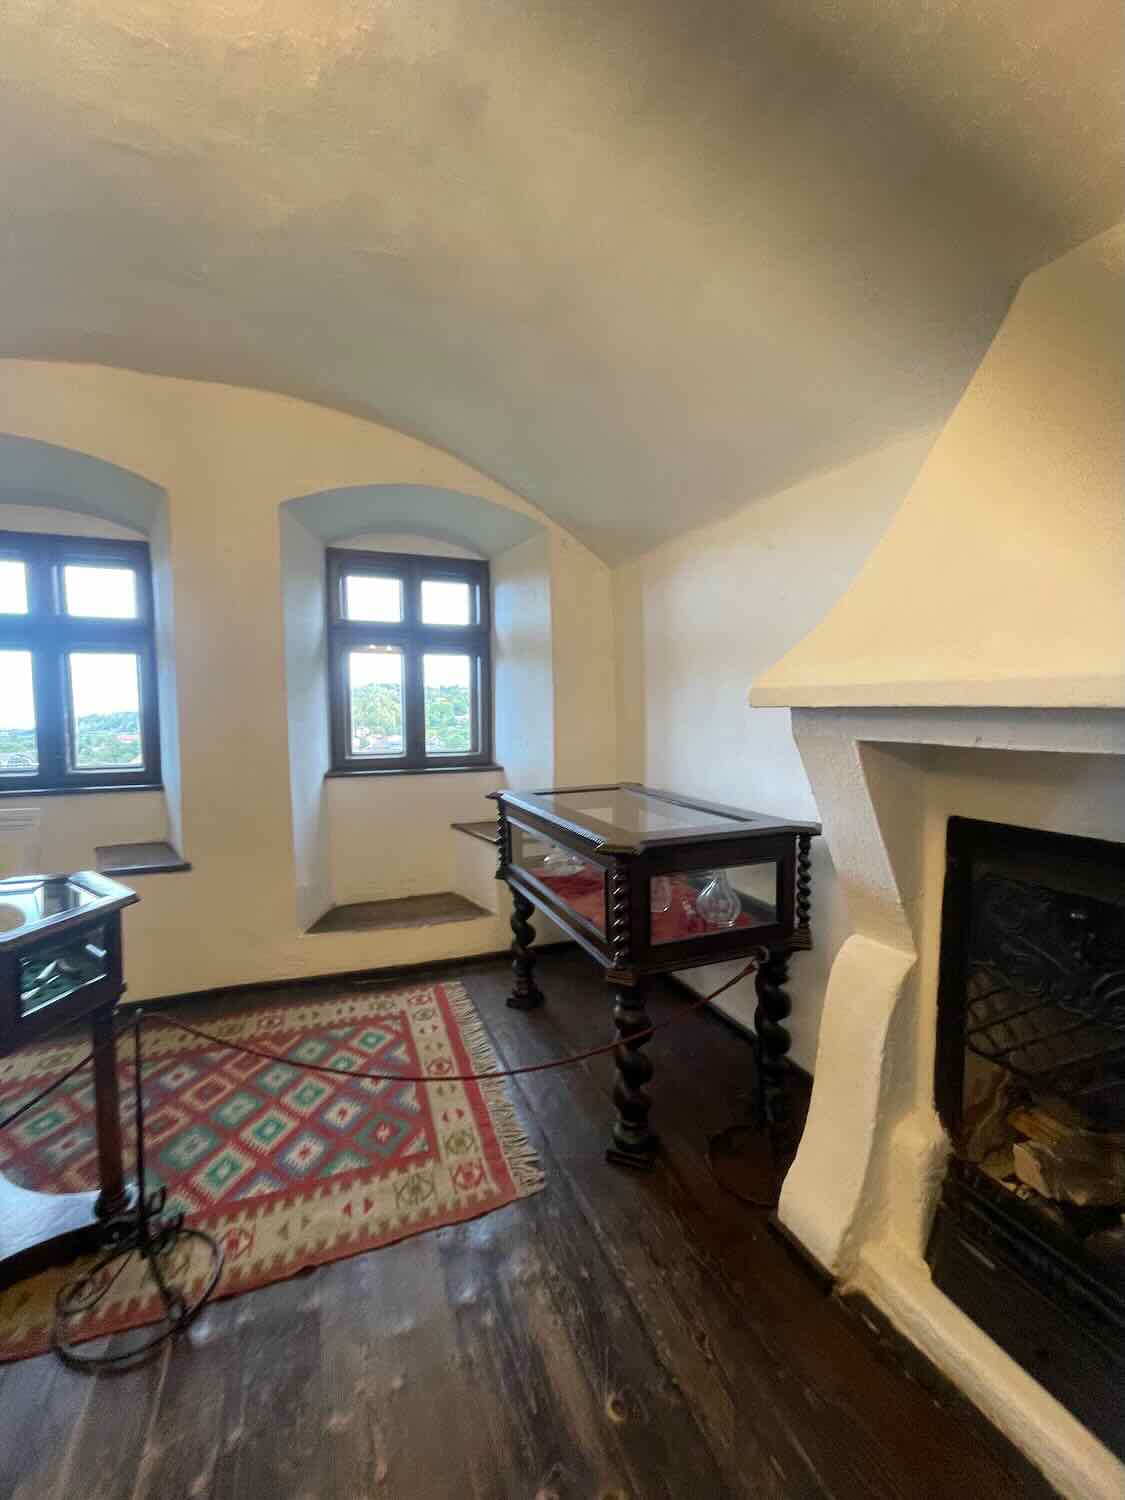 An intimate corner of a castle room featuring a traditional Romanian rug, wooden table with glass top, and a historic fireplace, invoking a sense of stepping back in time within Bran Castle.